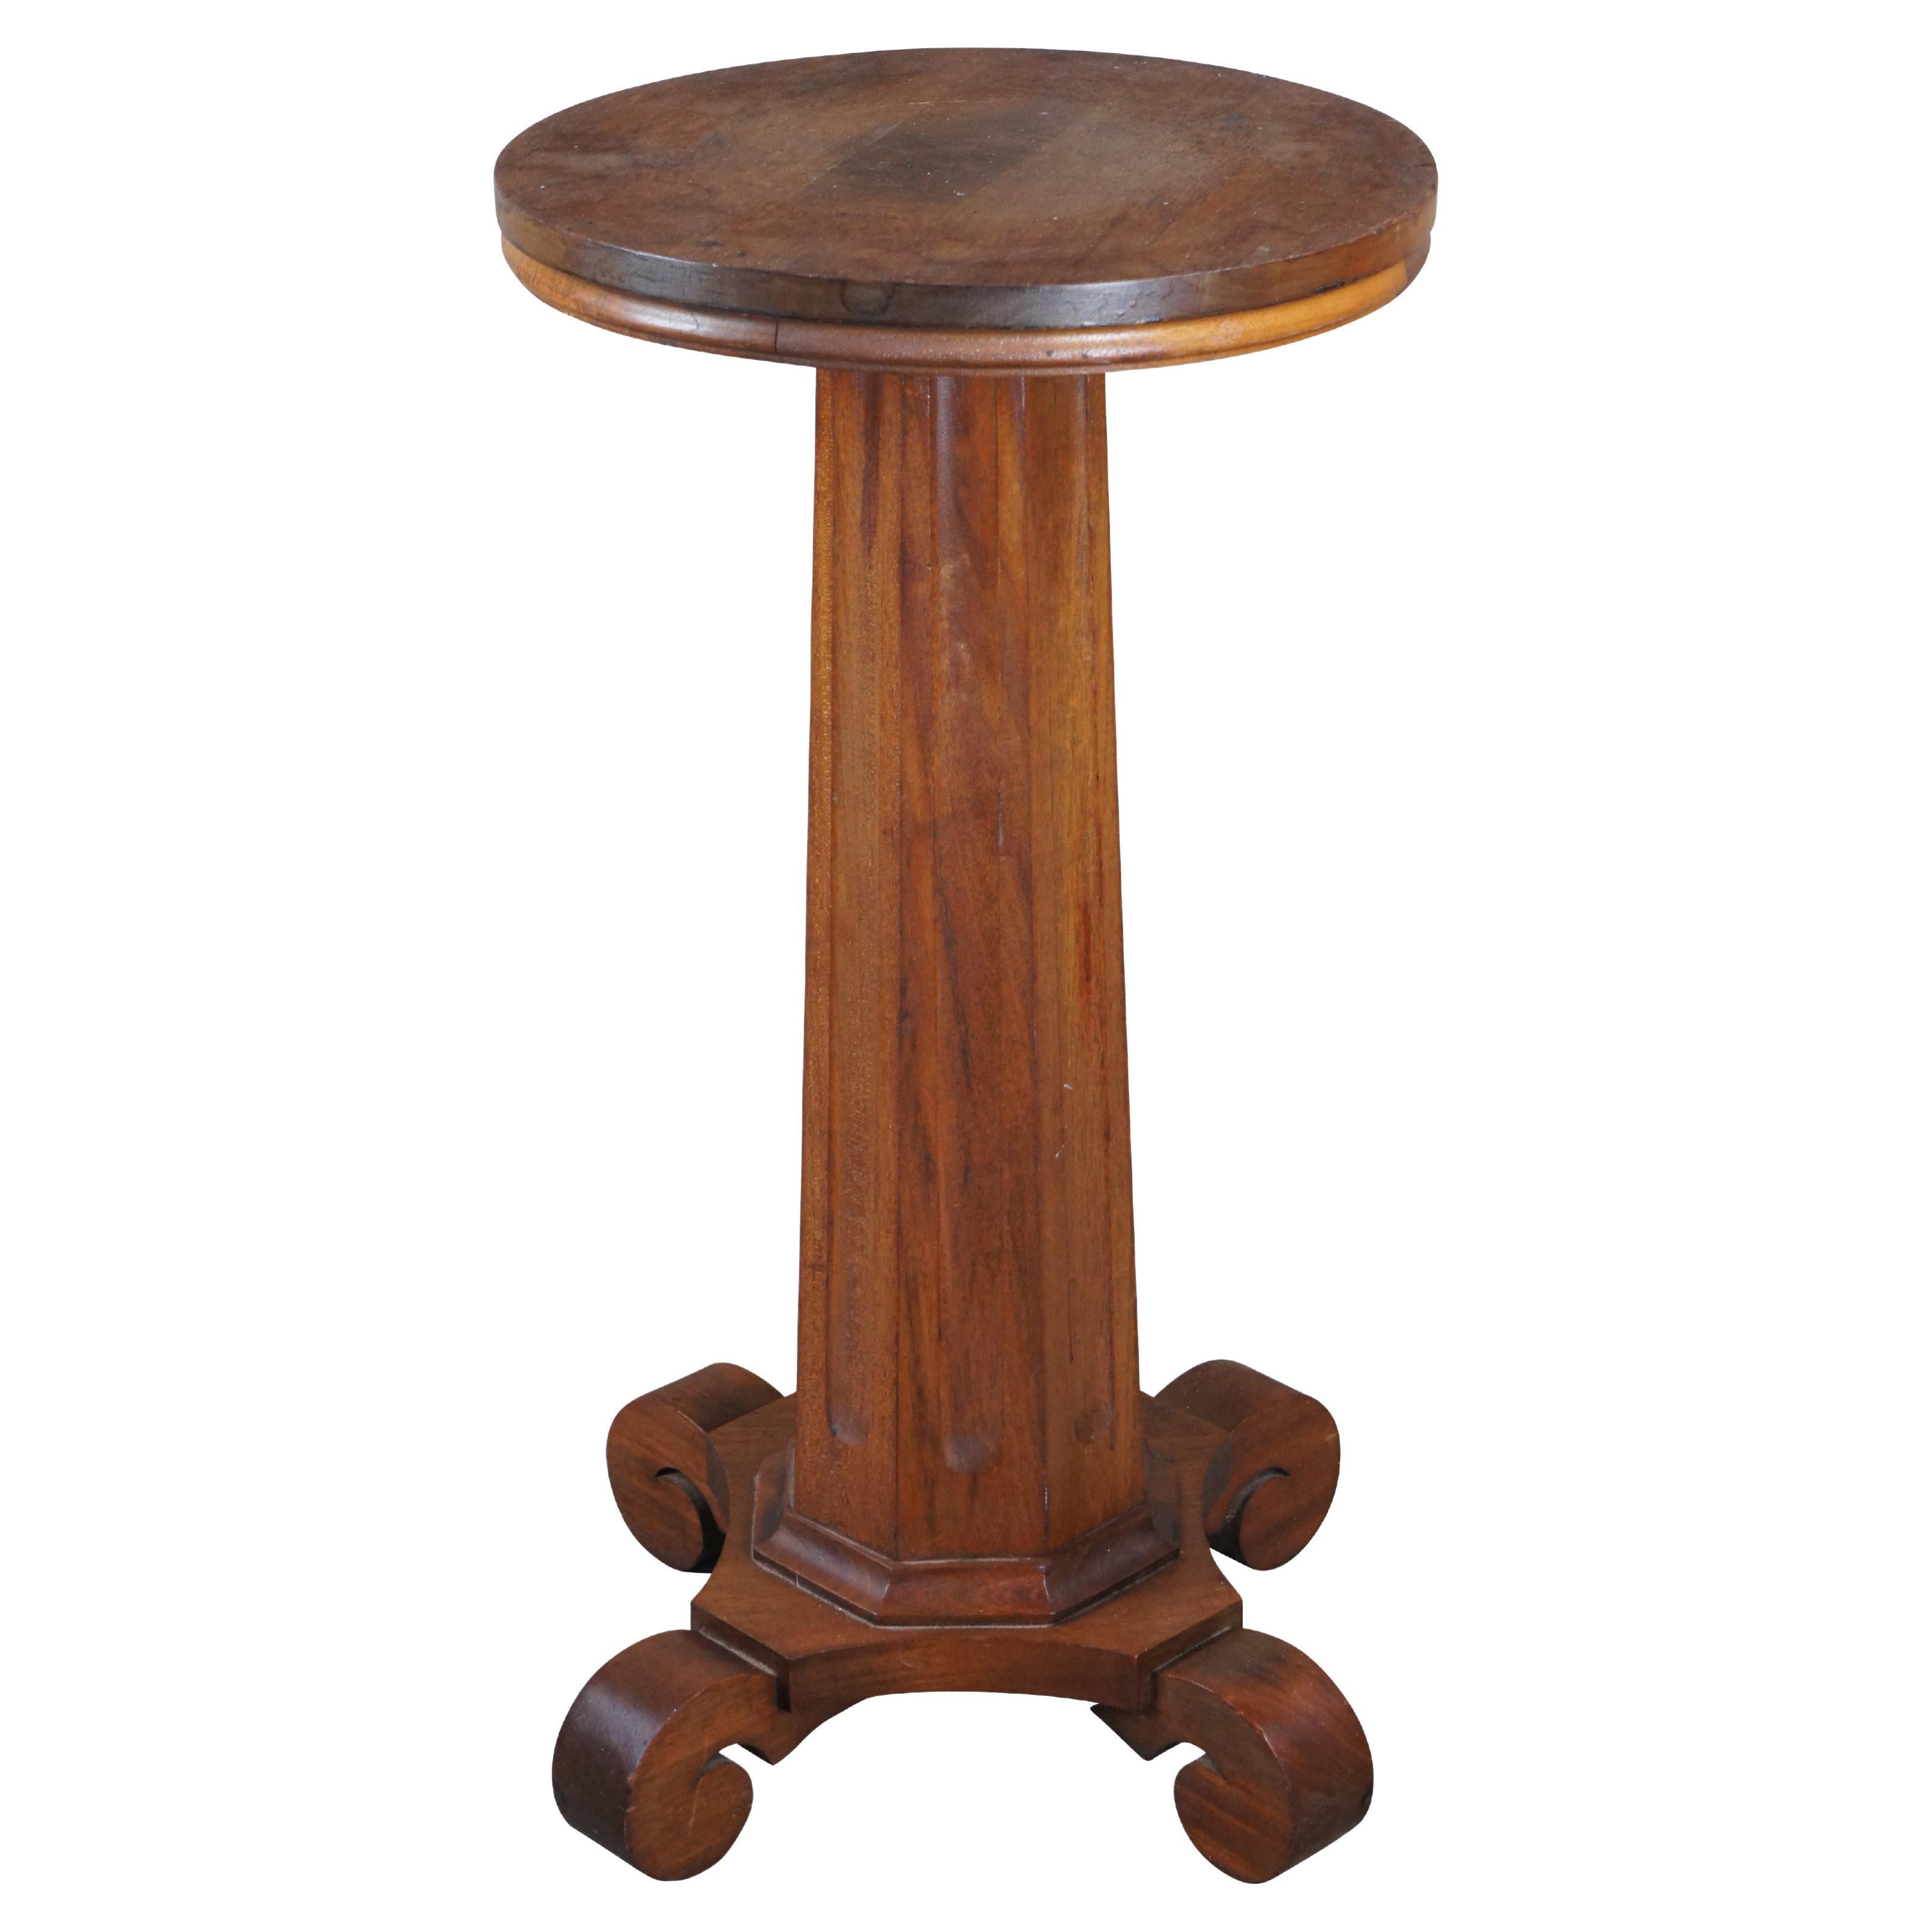 Antique American Classical Empire Mahogany Pedestal Table Sculpture Plant Stand For Sale